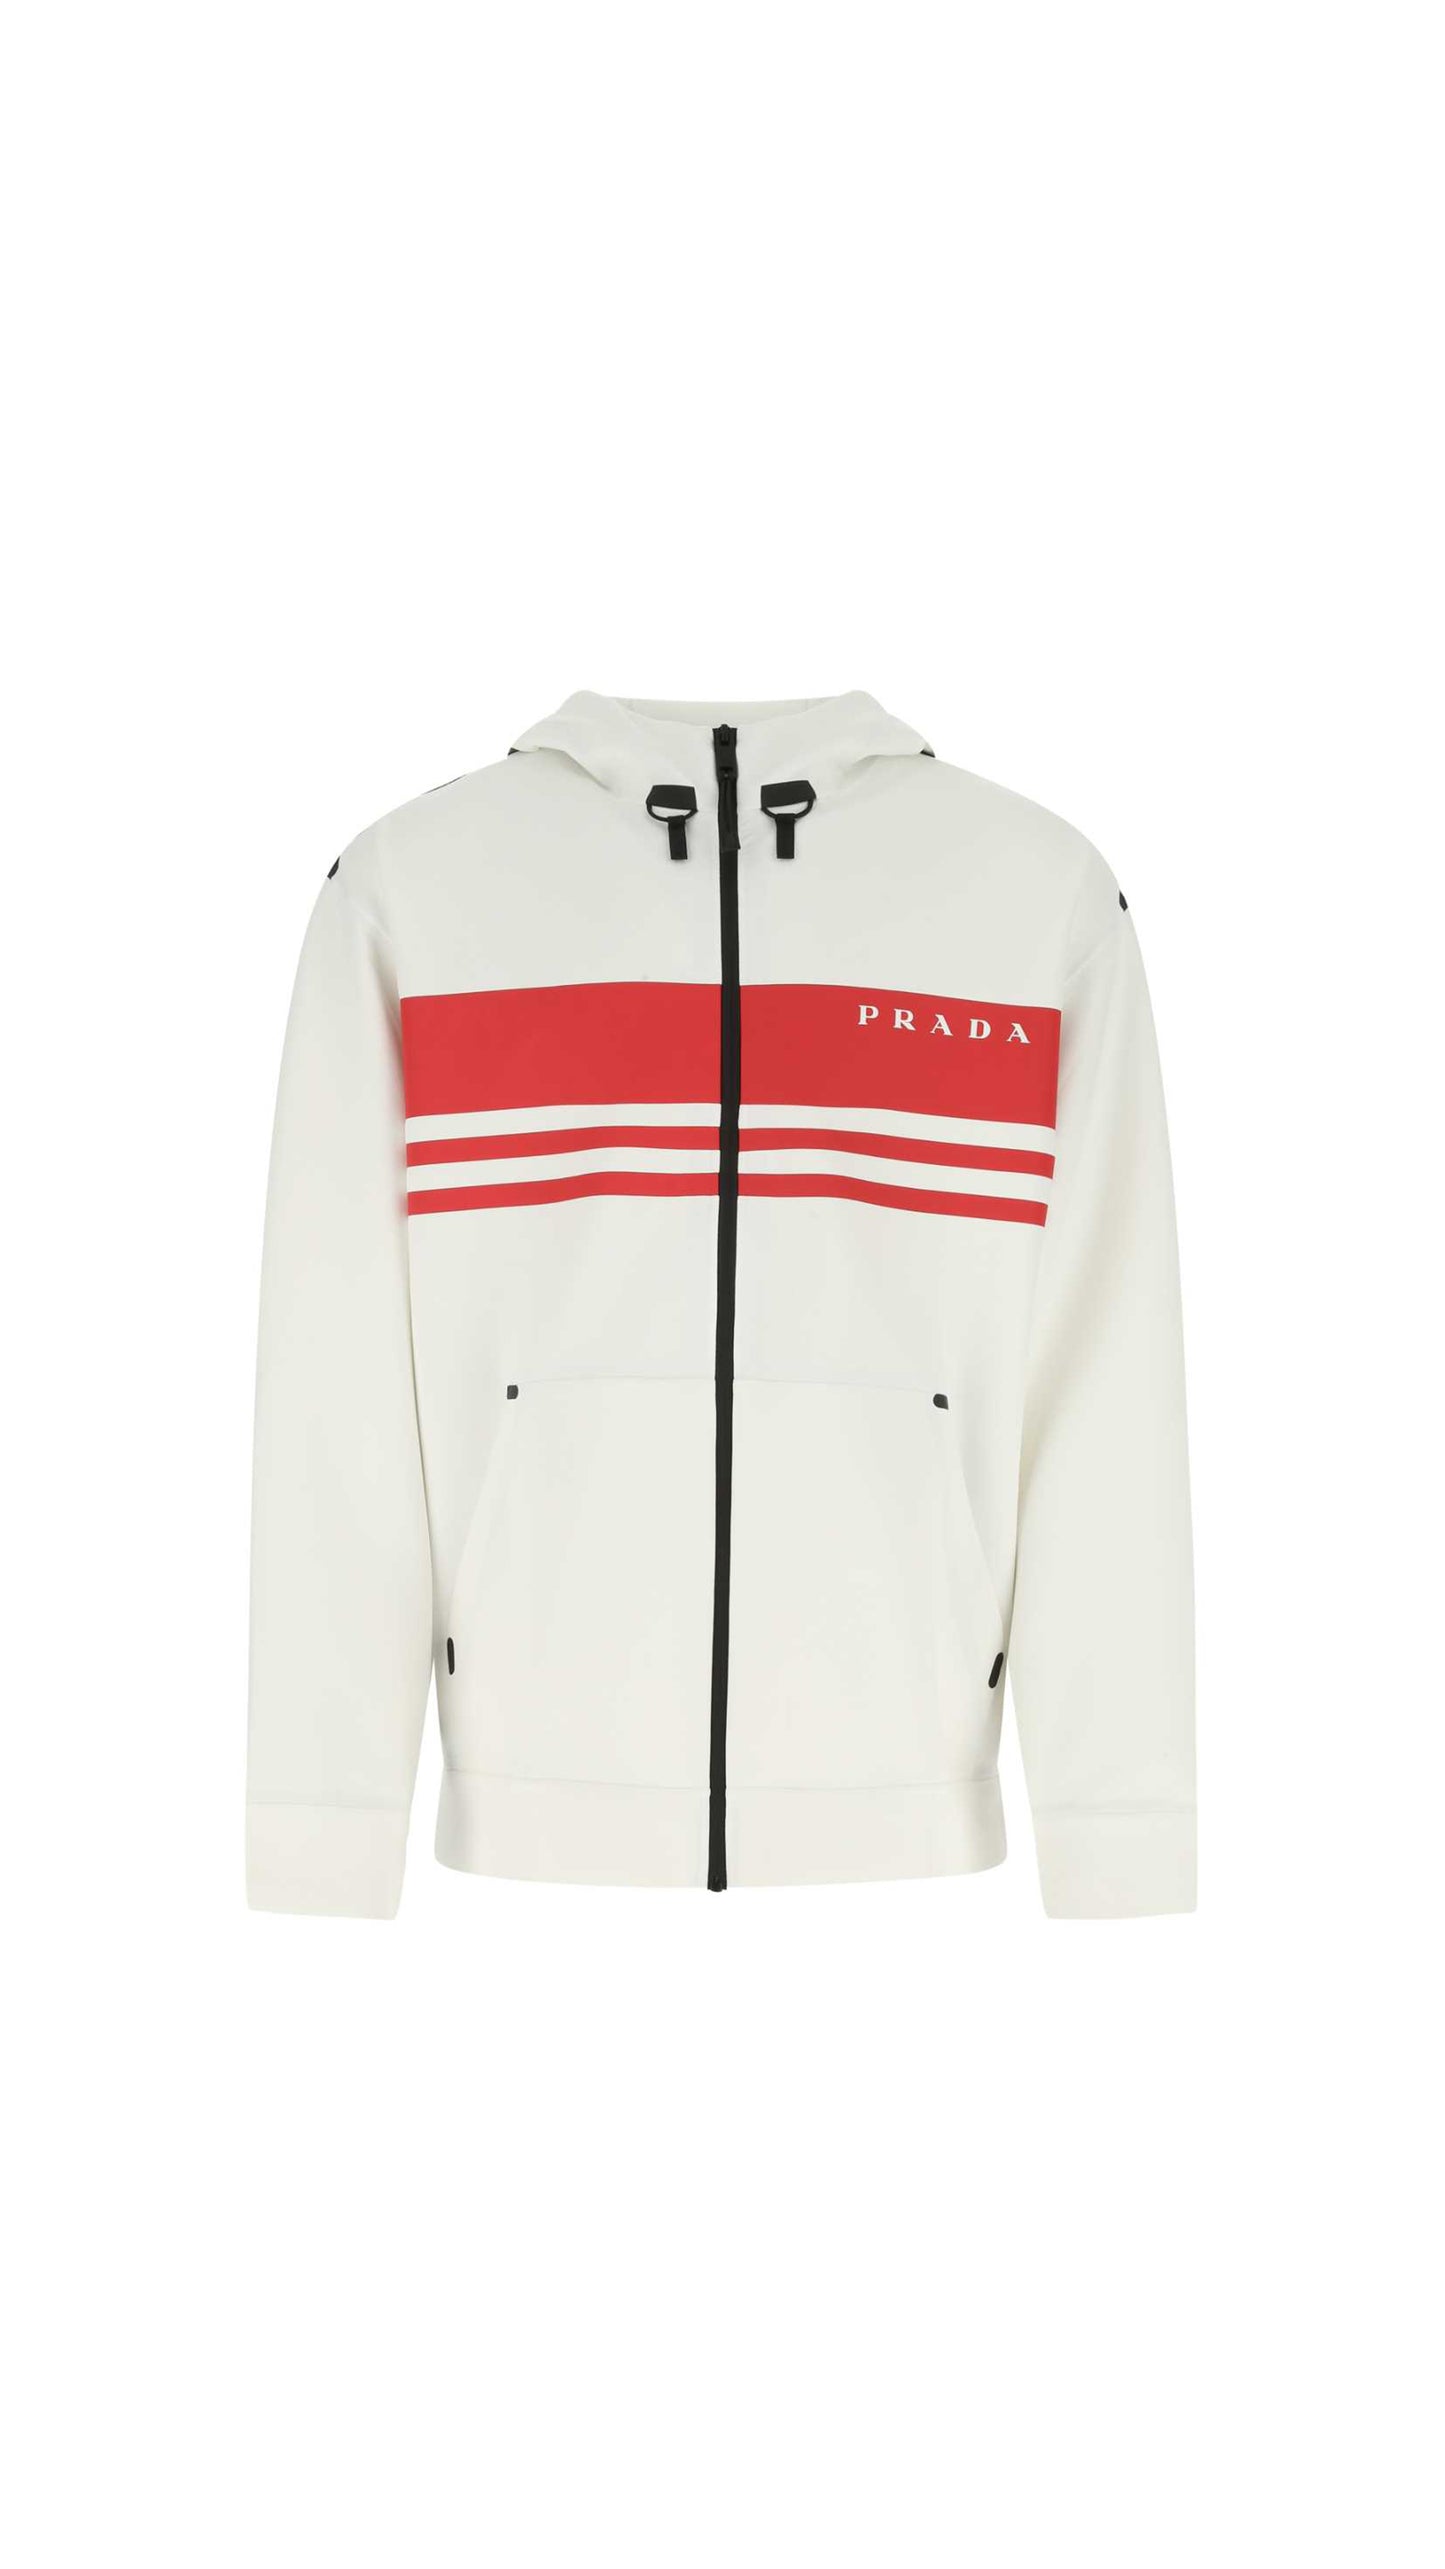 Printed Technical Fabric Jacket - White